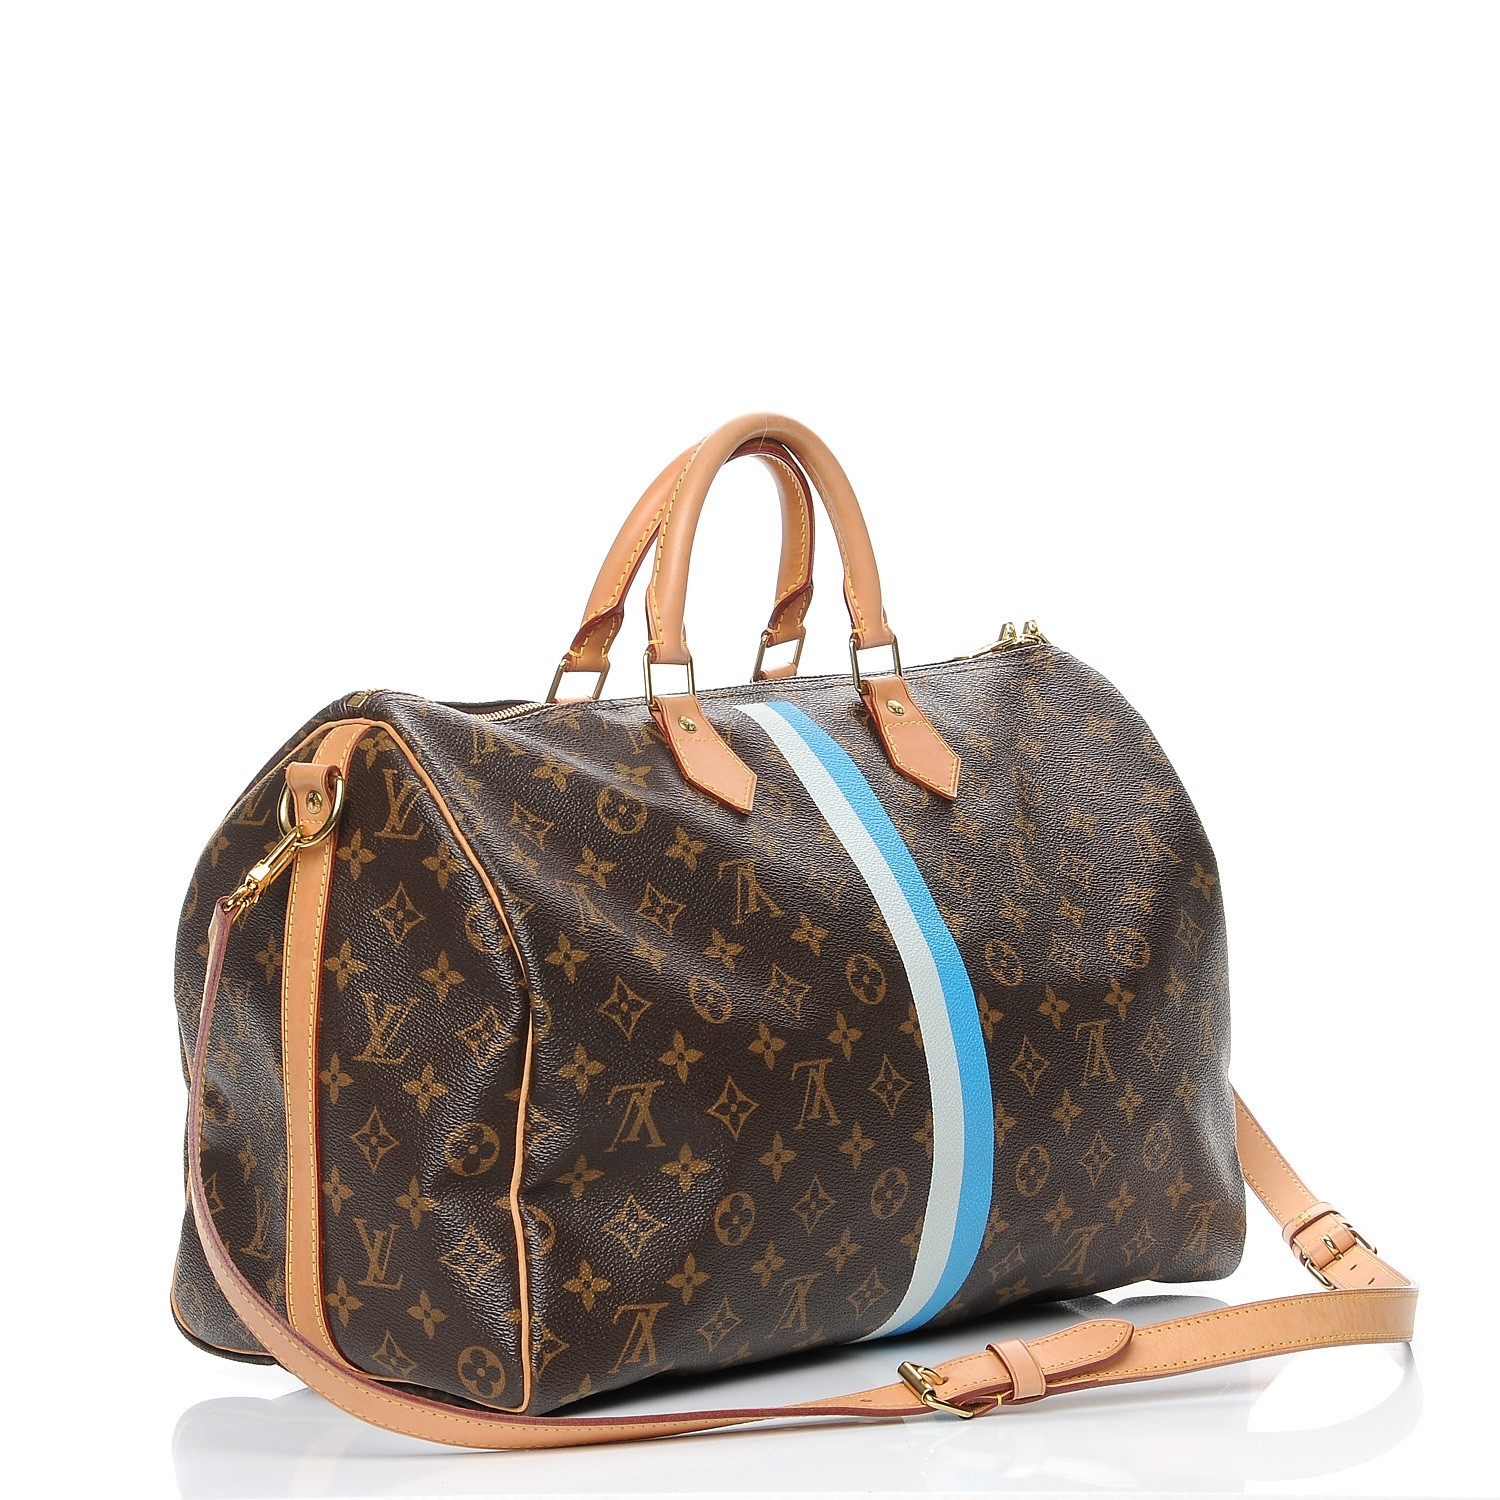 Louis Vuitton My Other Bag  Natural Resource Department